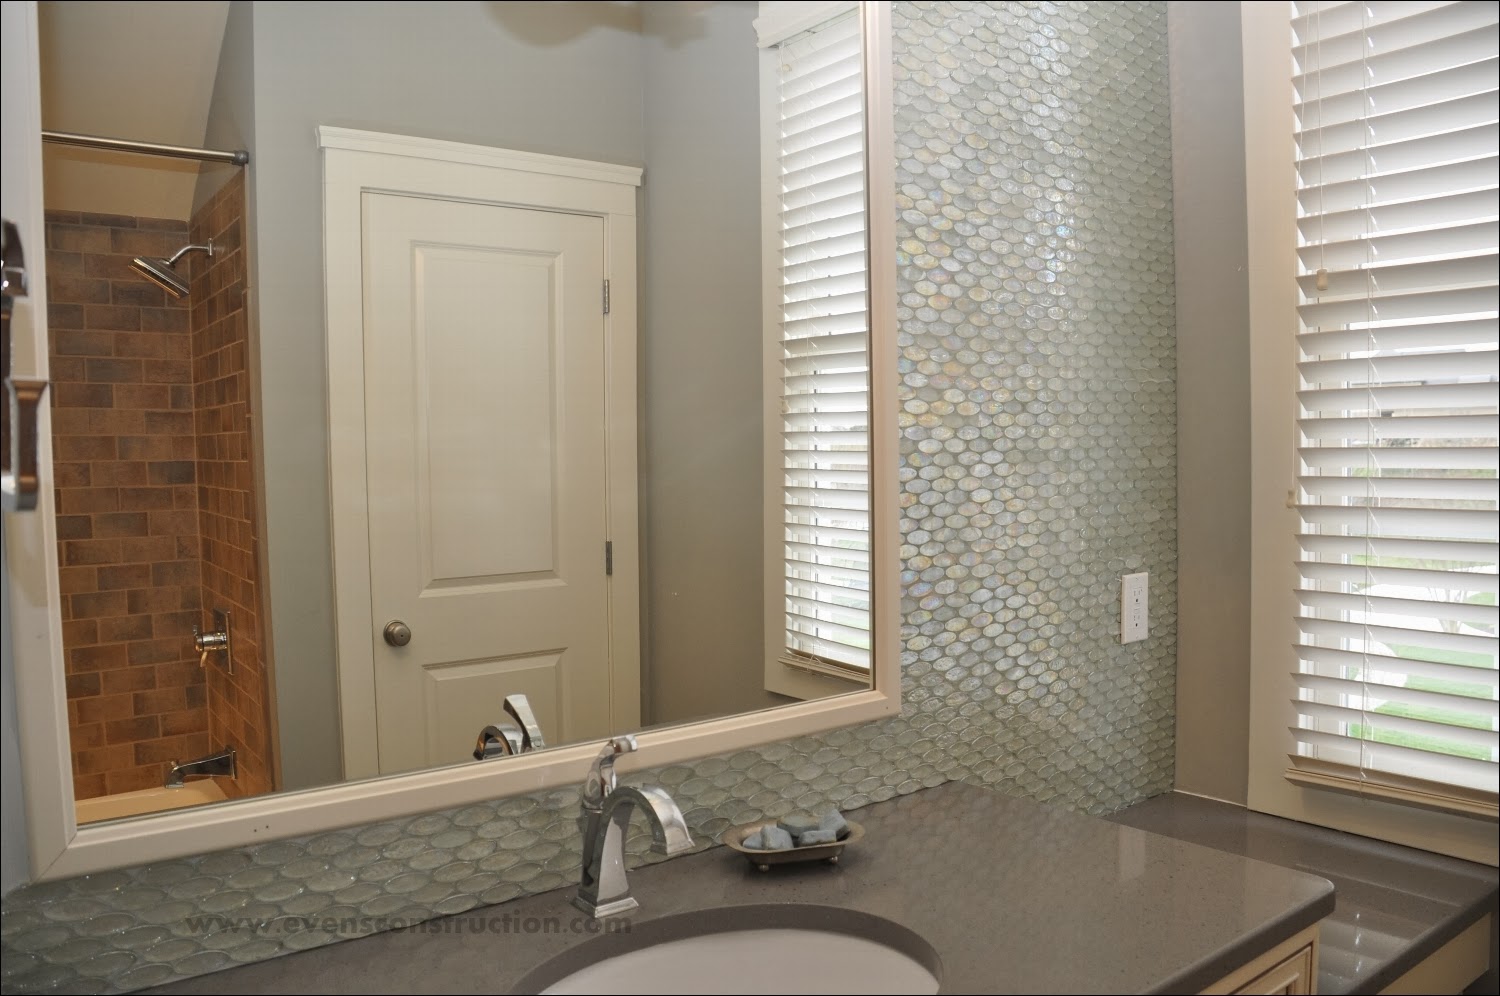 How to remove tile from bathroom wall? Removing tile from a bathroom wall is a task that requires patience, precision